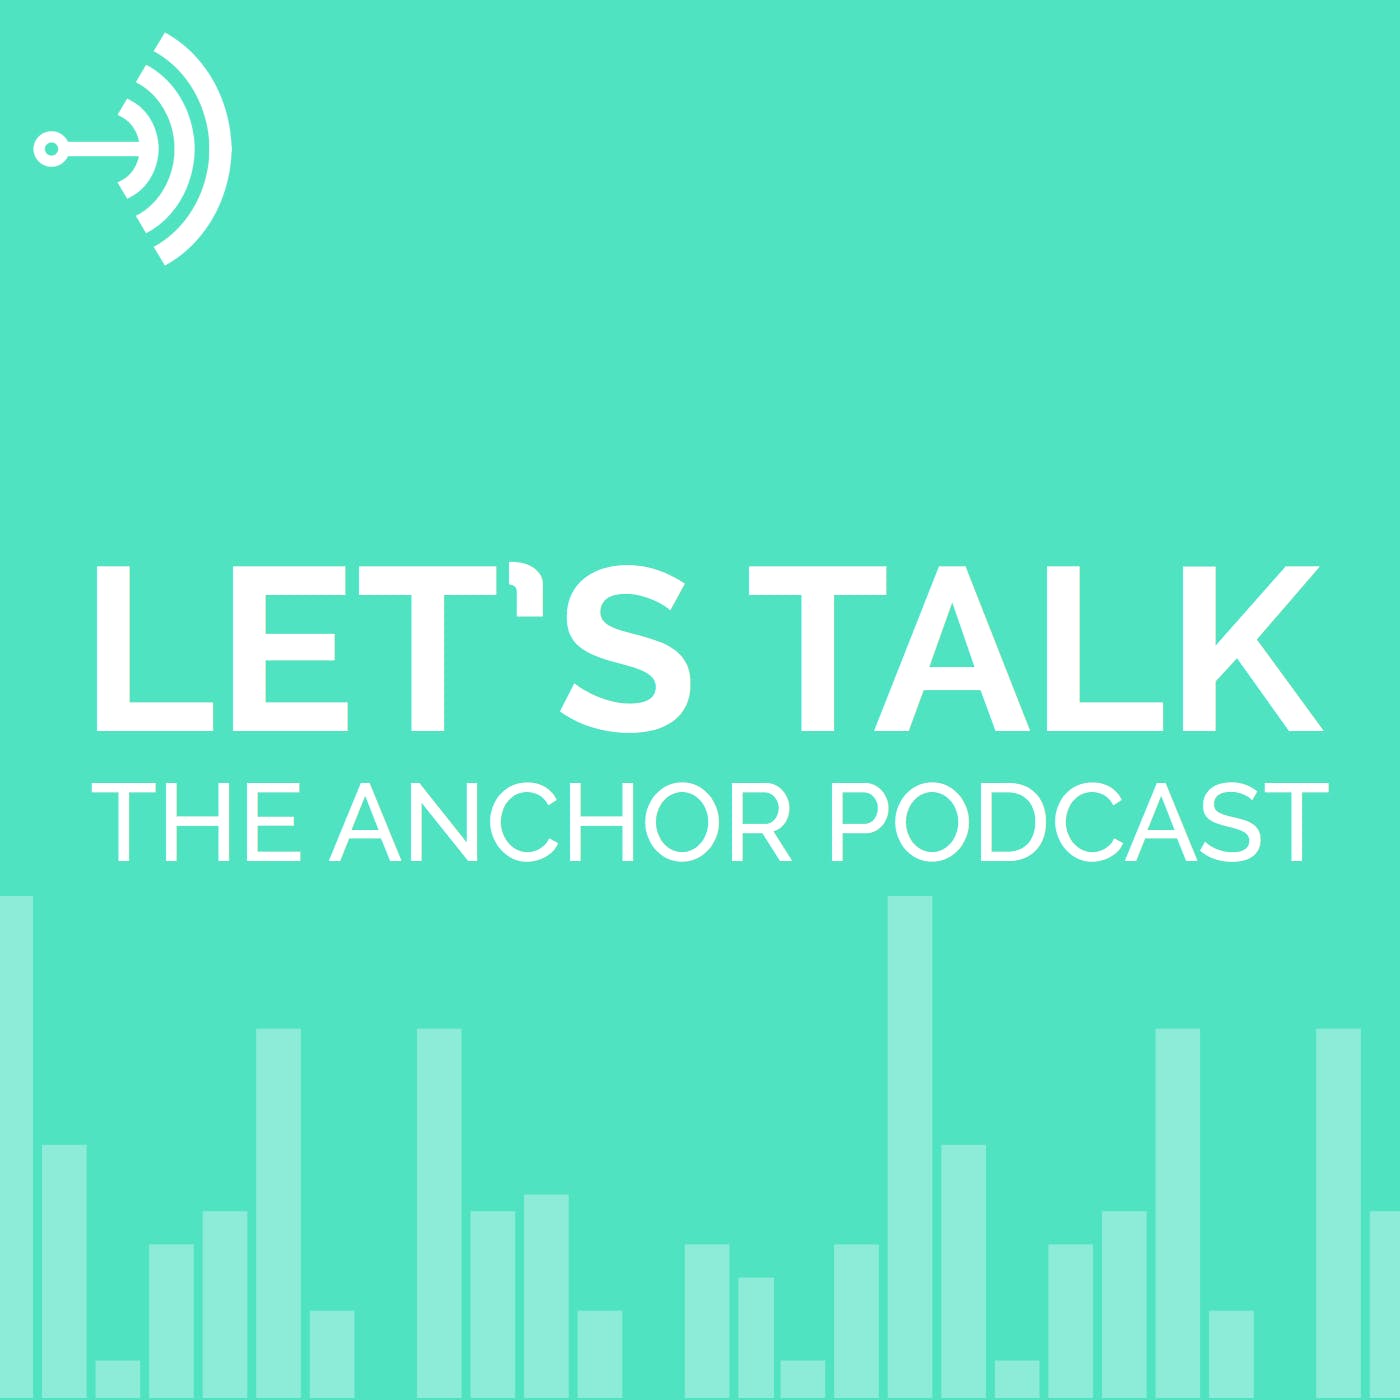 Let's Talk: The Anchor Podcast - Betaworks' Maya Prohovnik and Christian Rocha discuss "founder's doubt” media 1